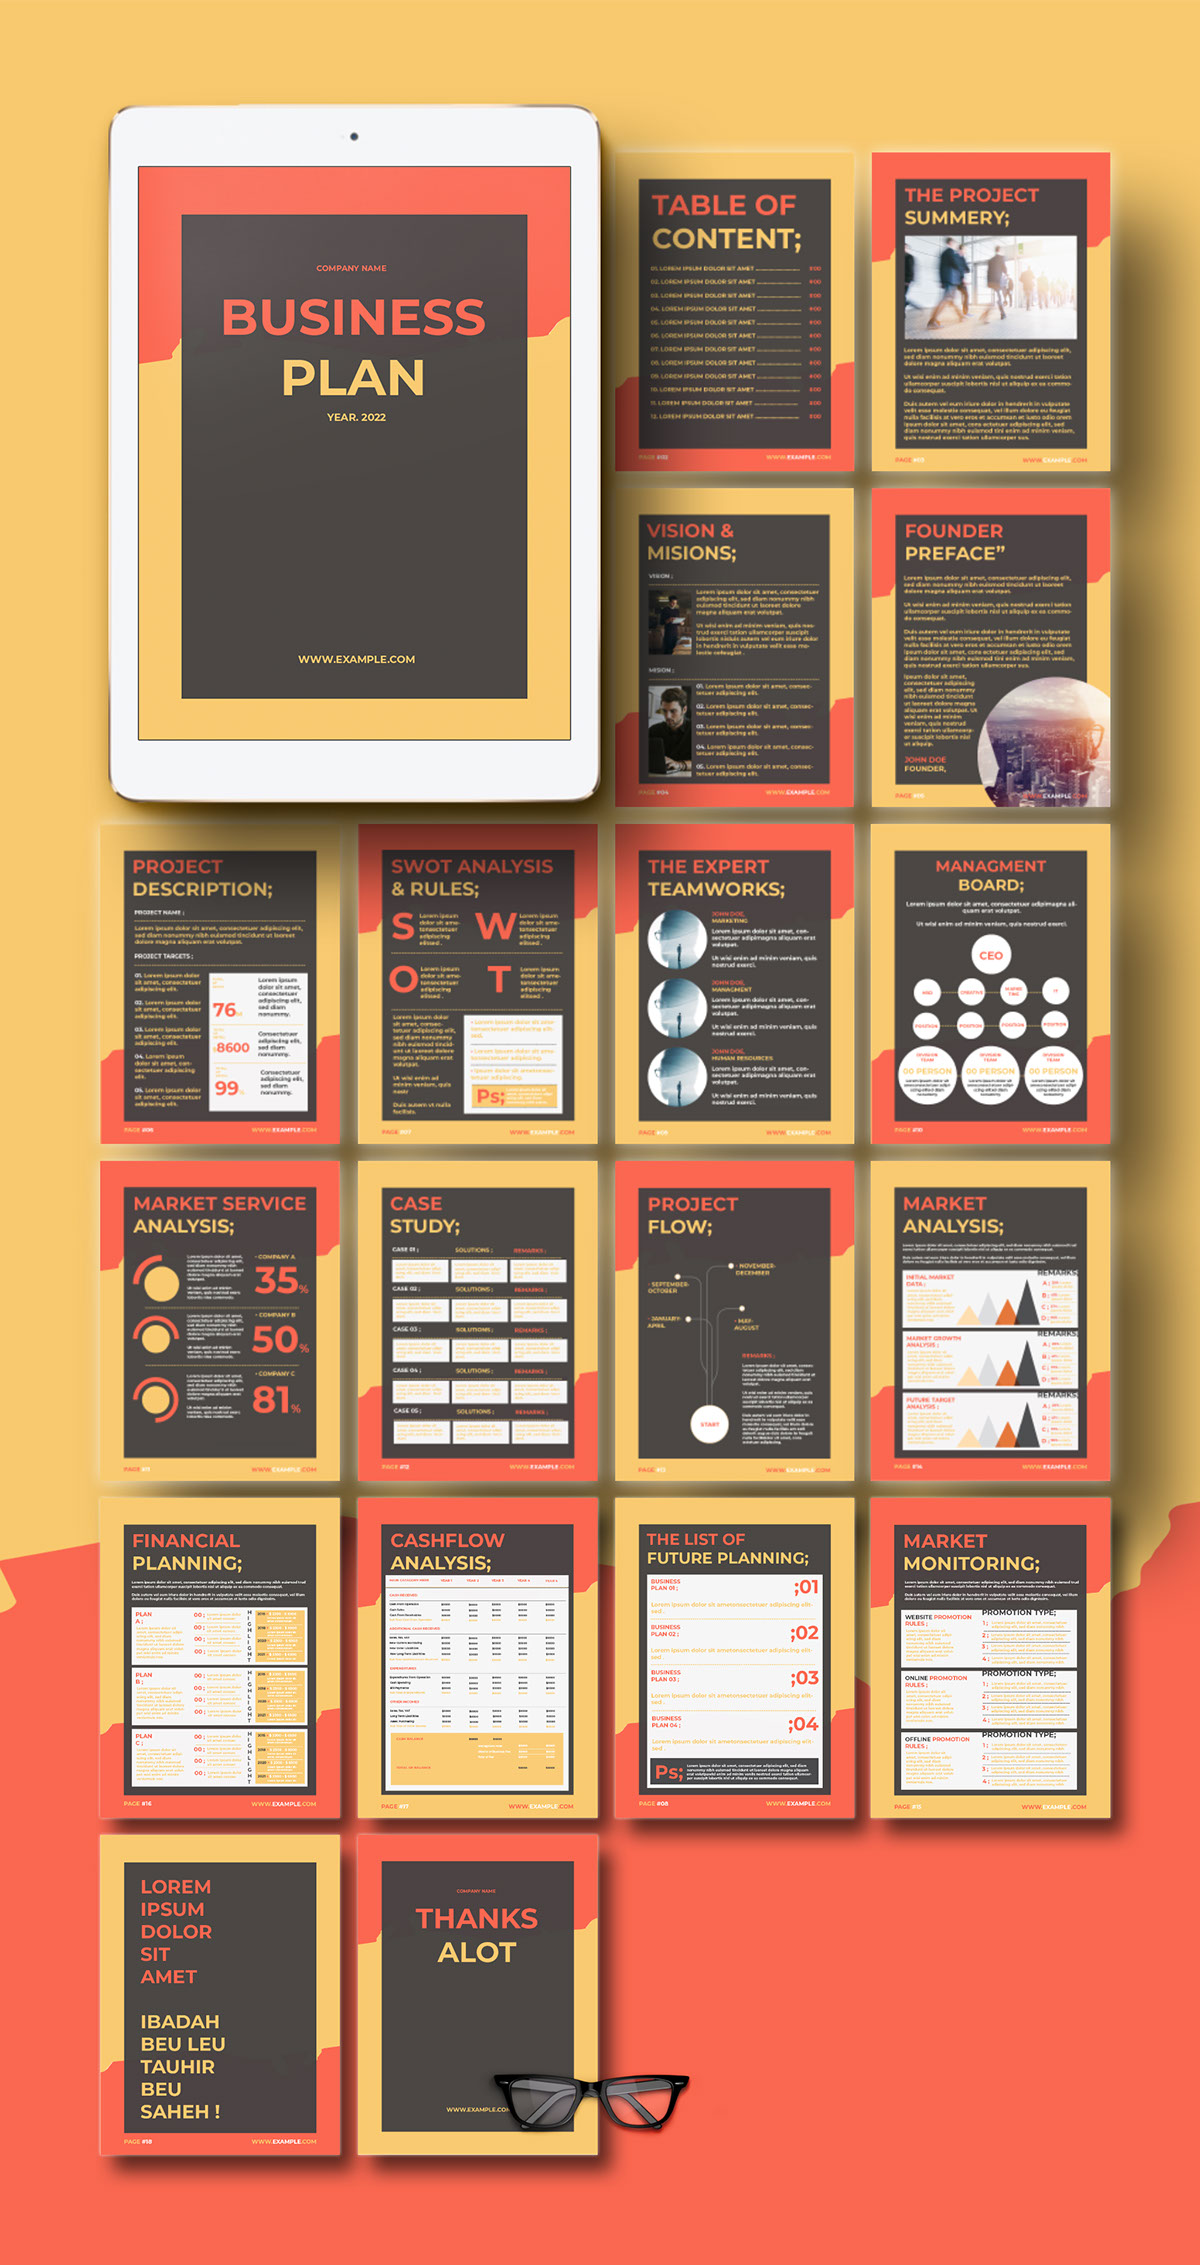 Business Plan Layout with Orange and Yellow Accent rendition image